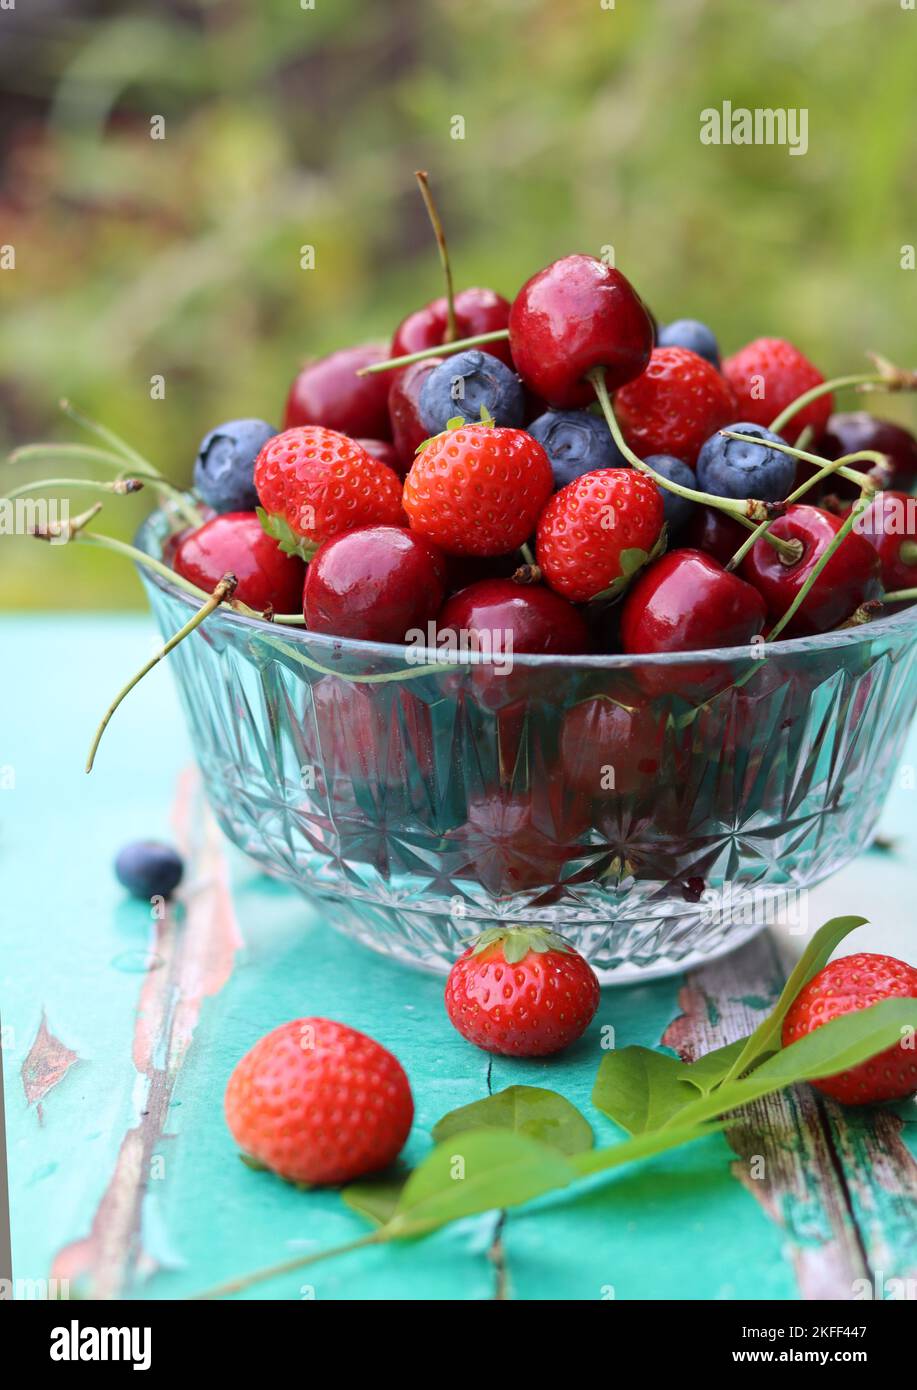 Glass bowl full of juicy organic berries. Summer still life with strawberry, sweet cherry, blueberry. Eating fresh concept. Stock Photo